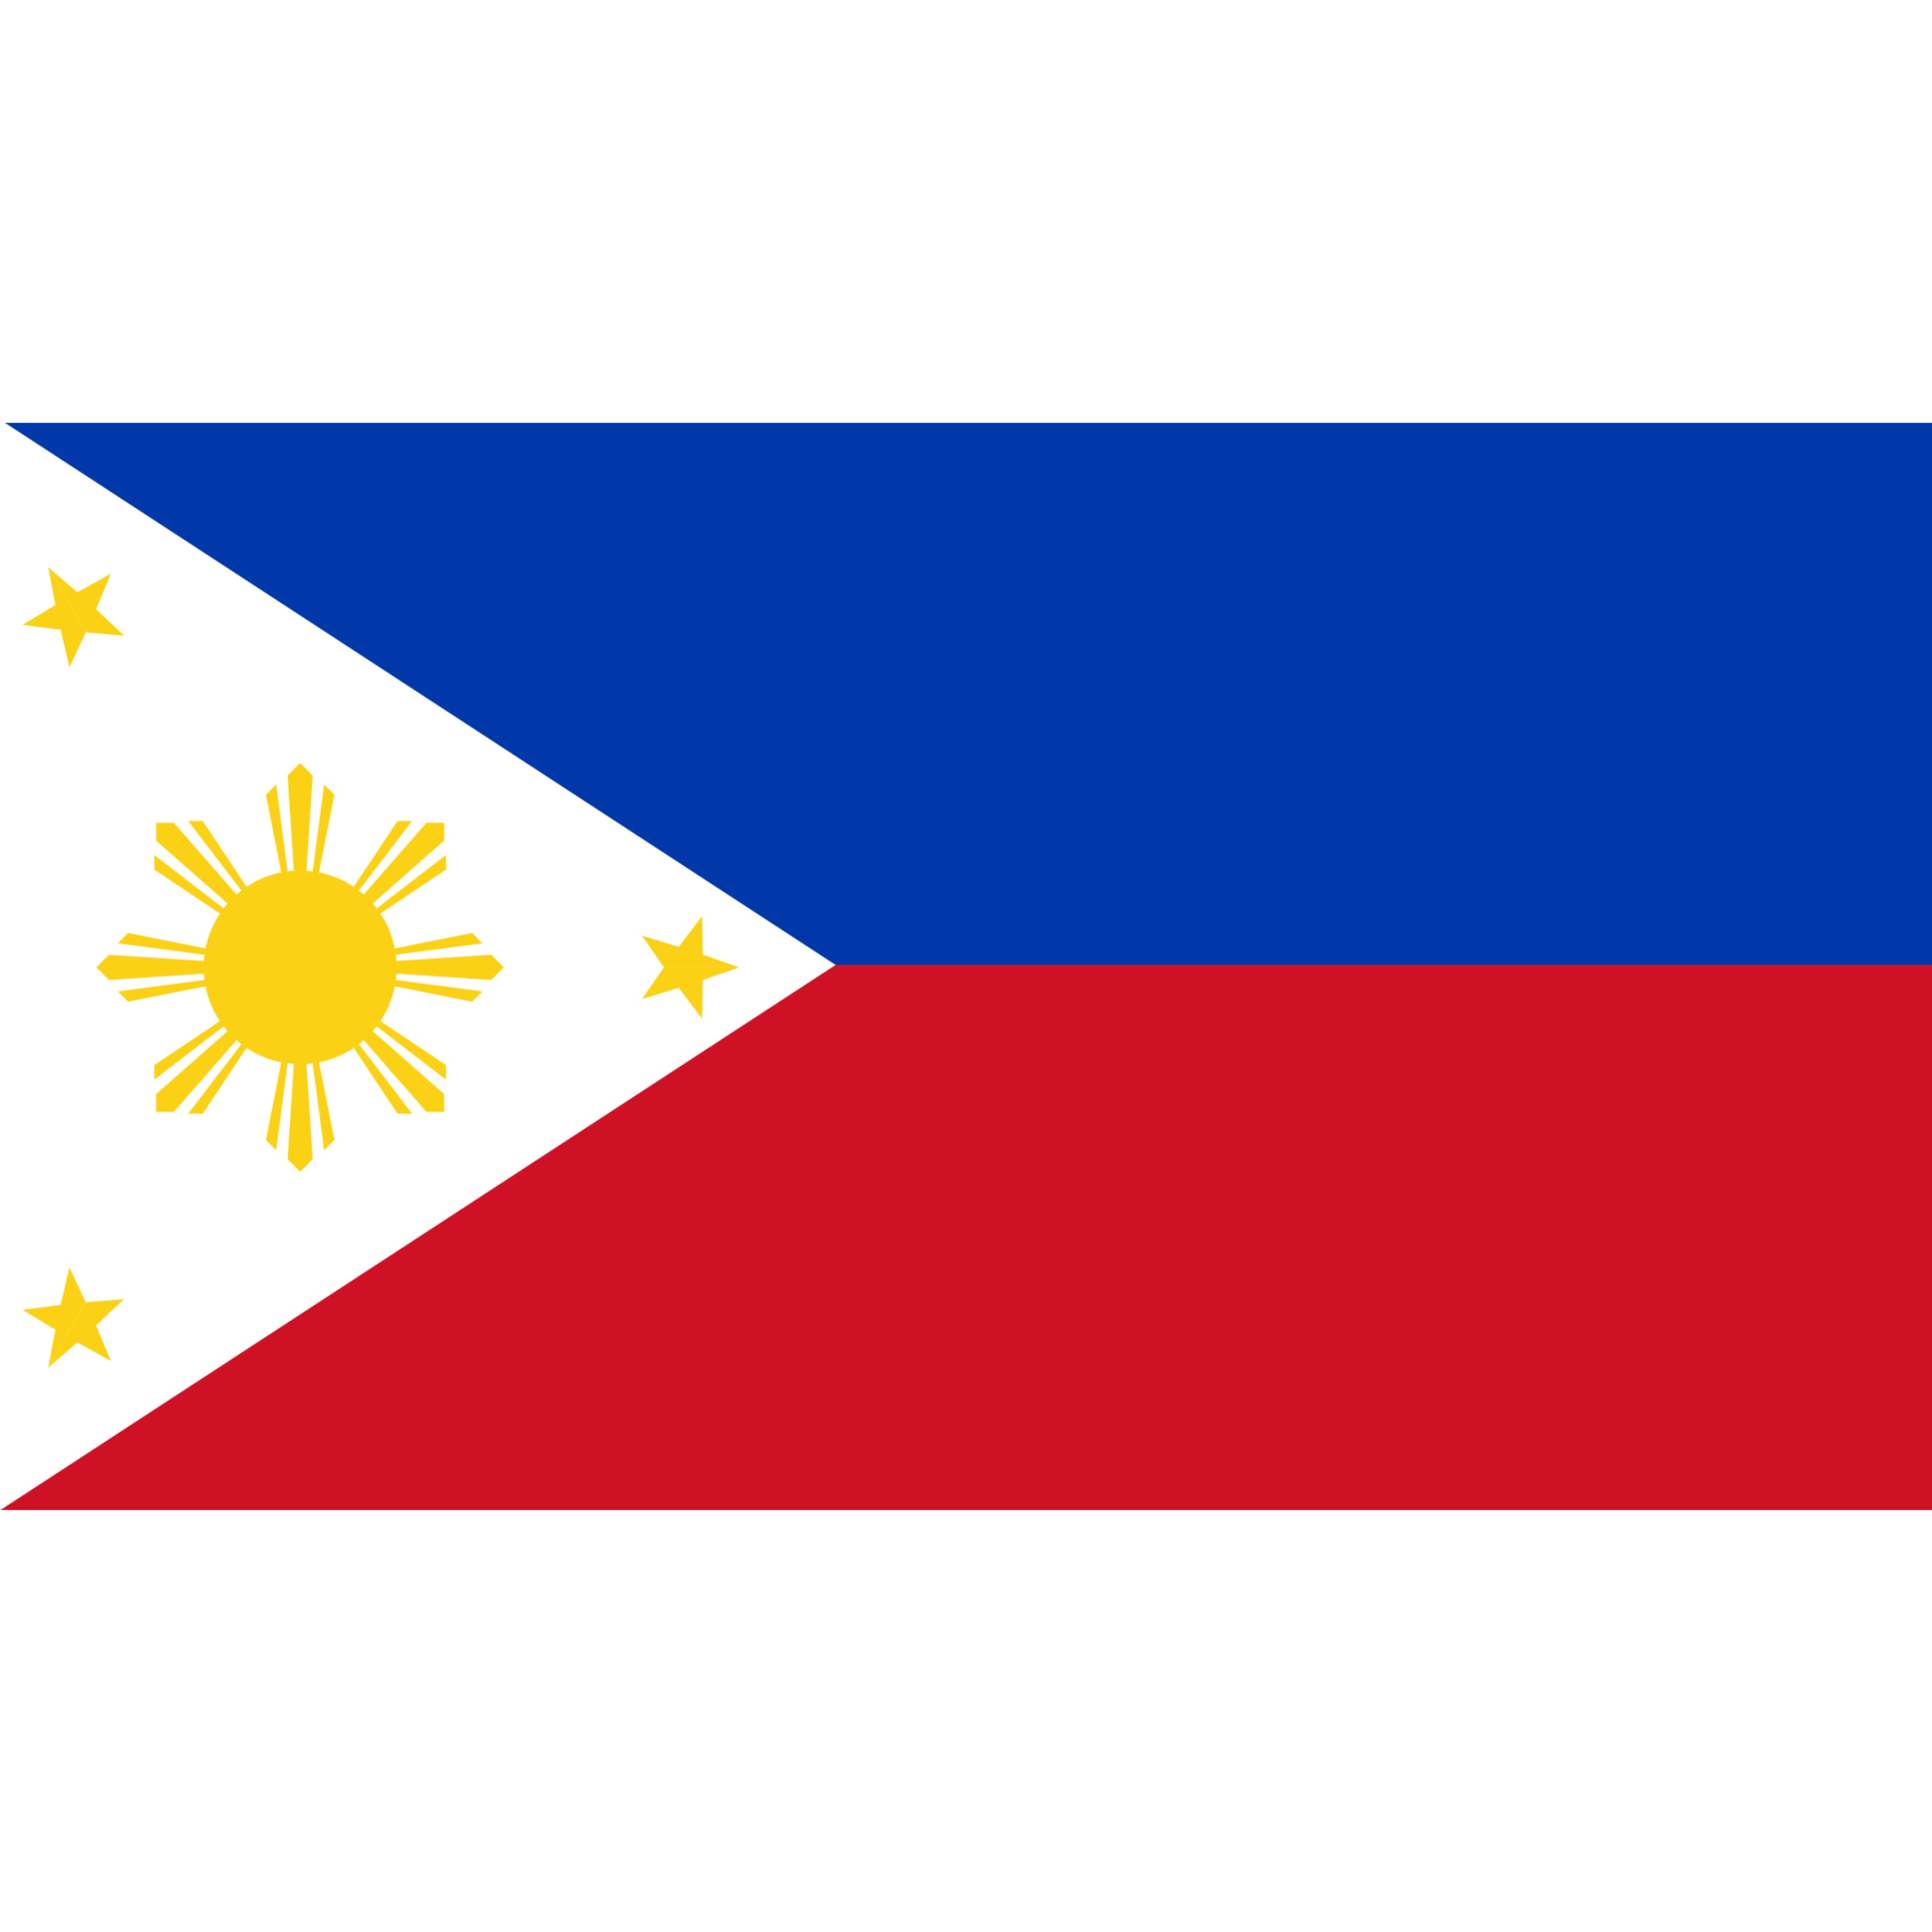 The Philippines flag has 2 equal horizontal halves in blue and red and a white triangle on the left with a golden-yellow sun.